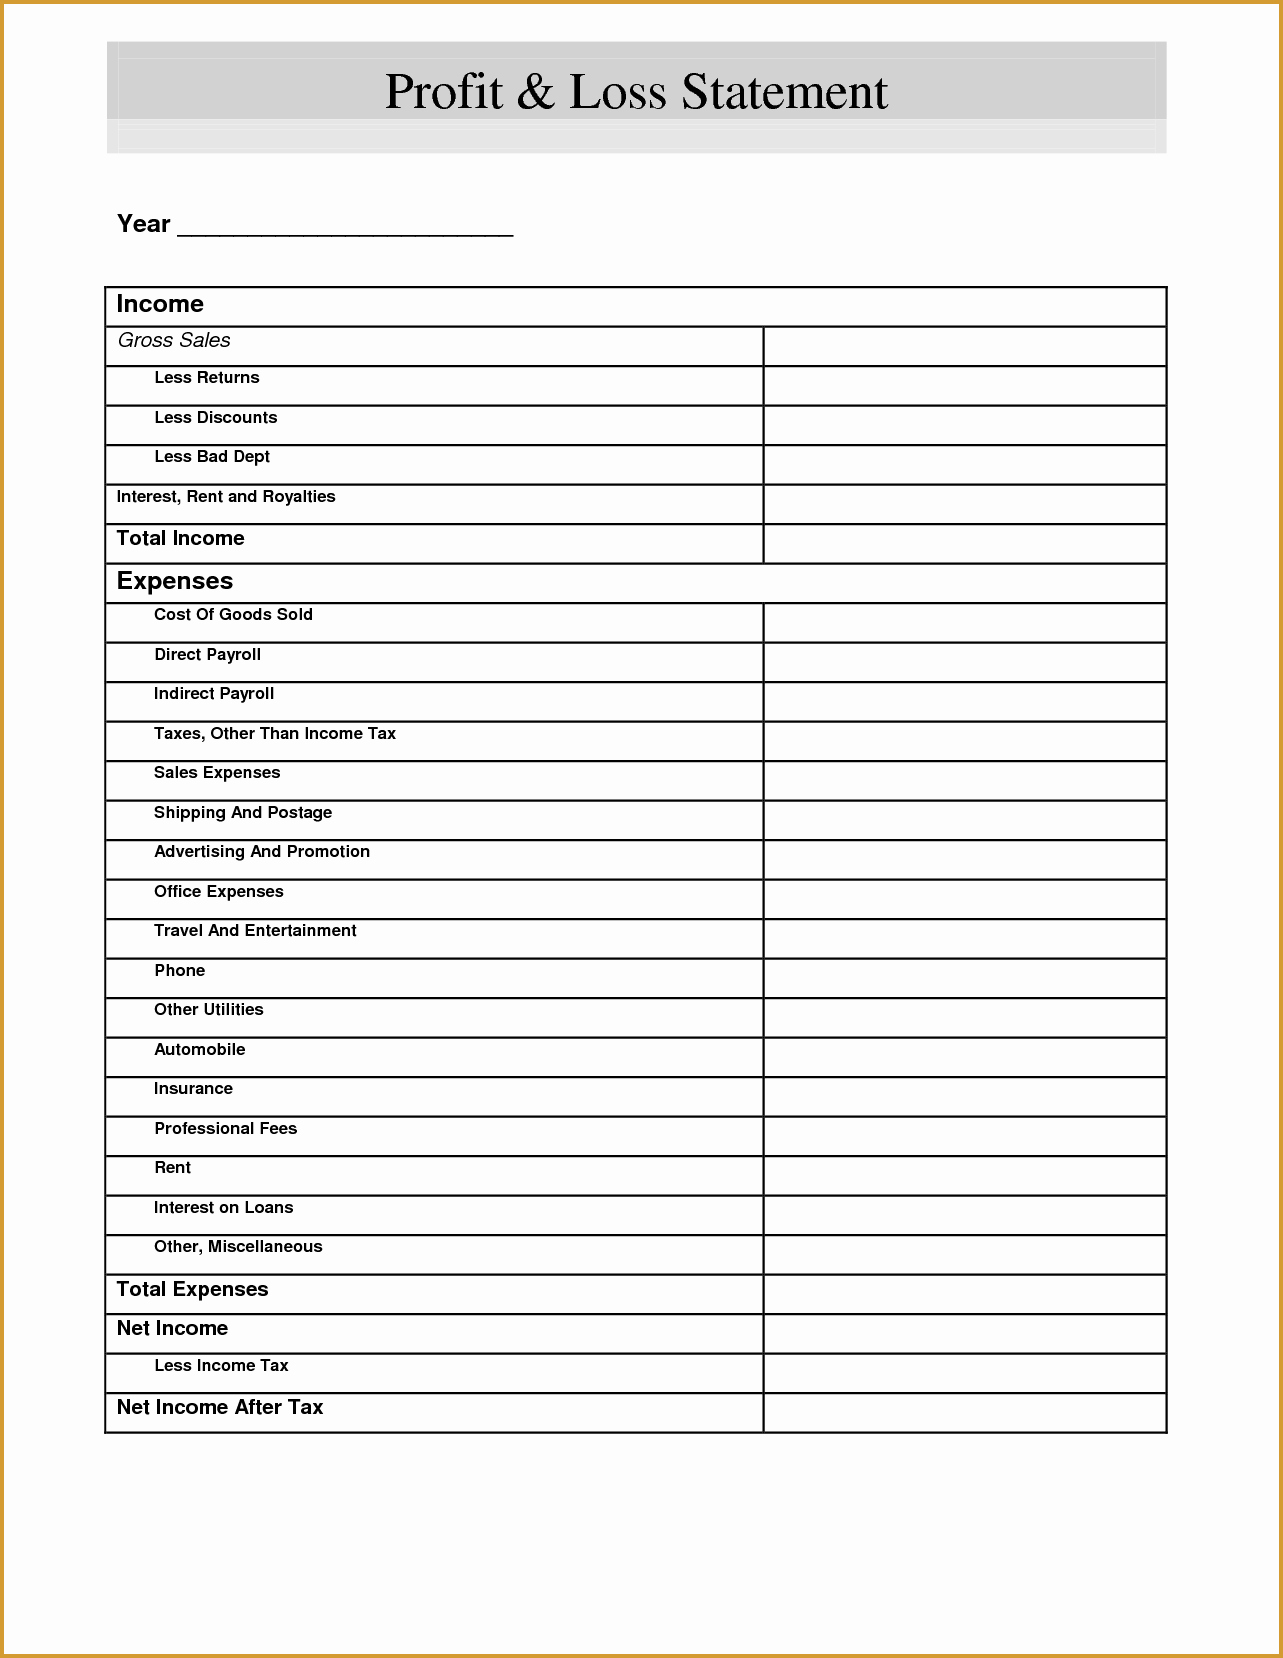 Profit and Loss Sheet Template New Free Profit and Loss Statement Template form